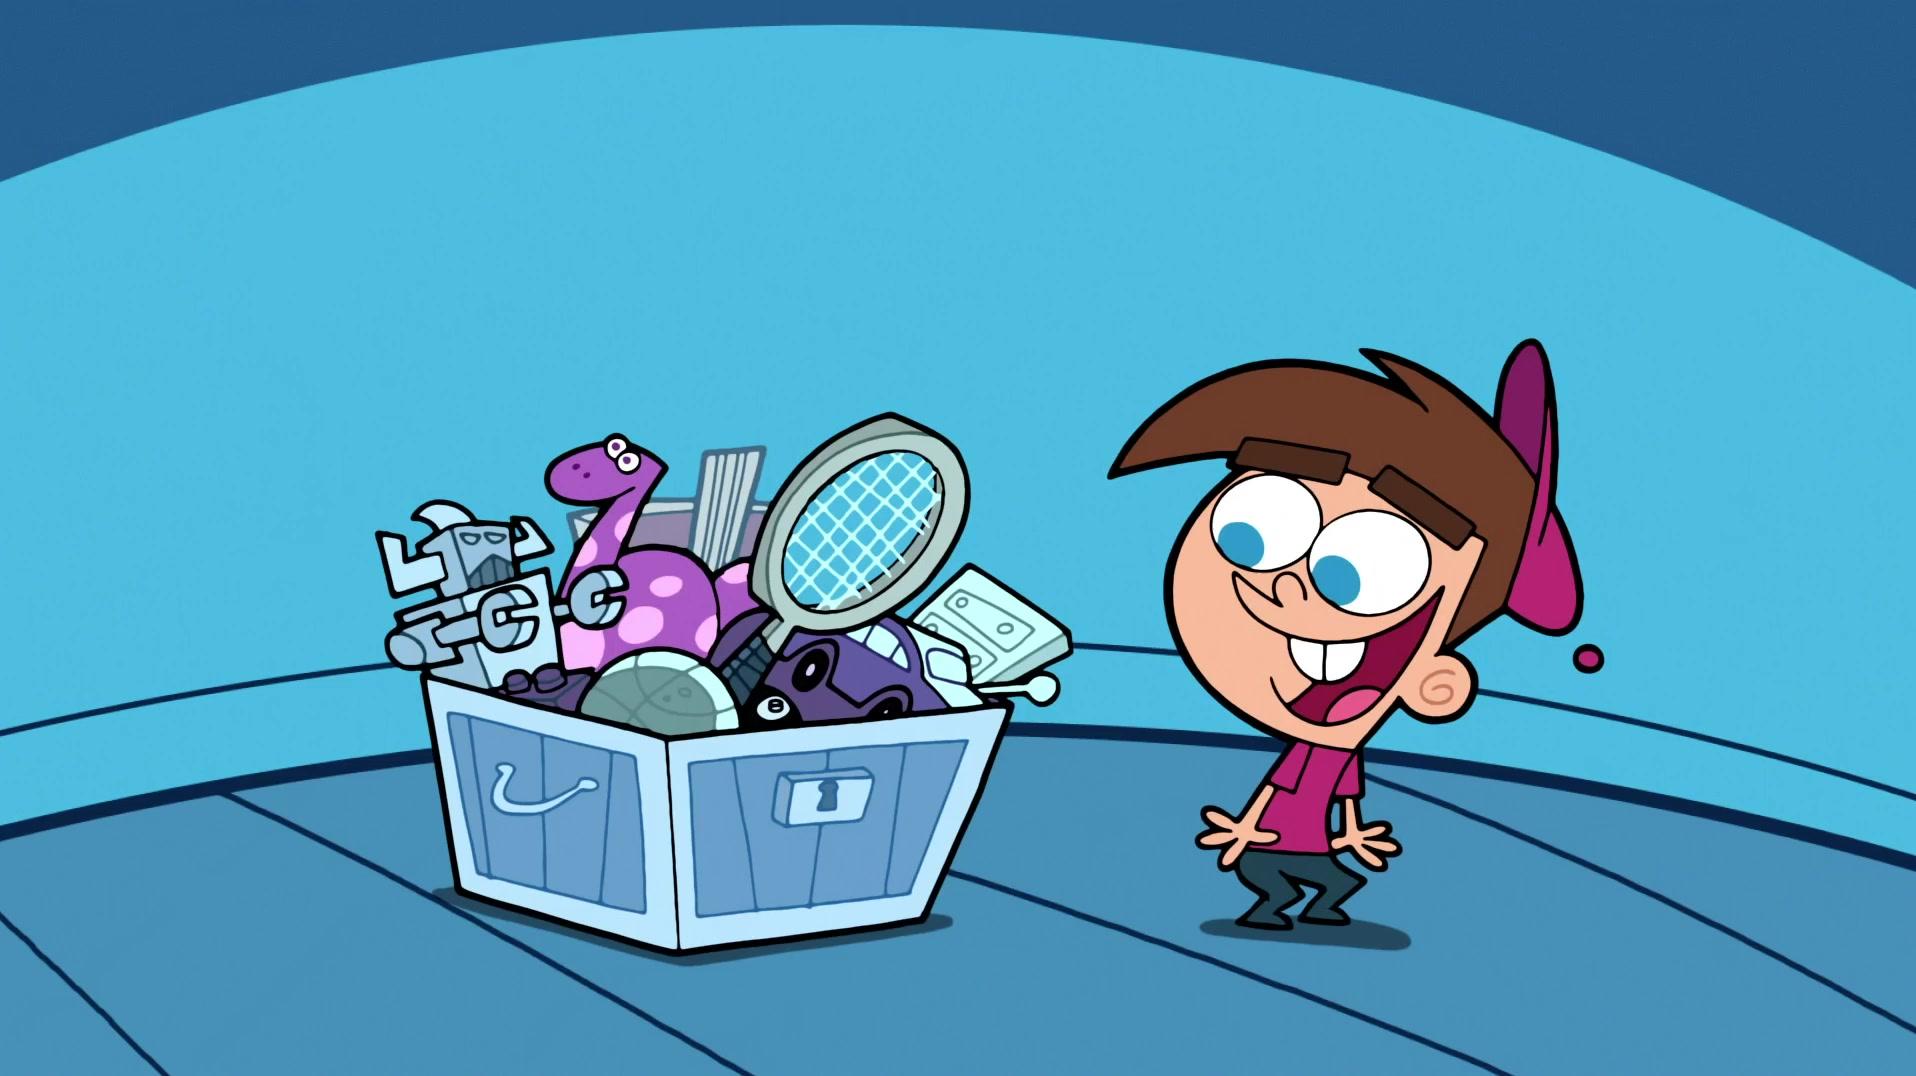 Best 56+ The Fairly OddParents Wallpapers on HipWallpapers